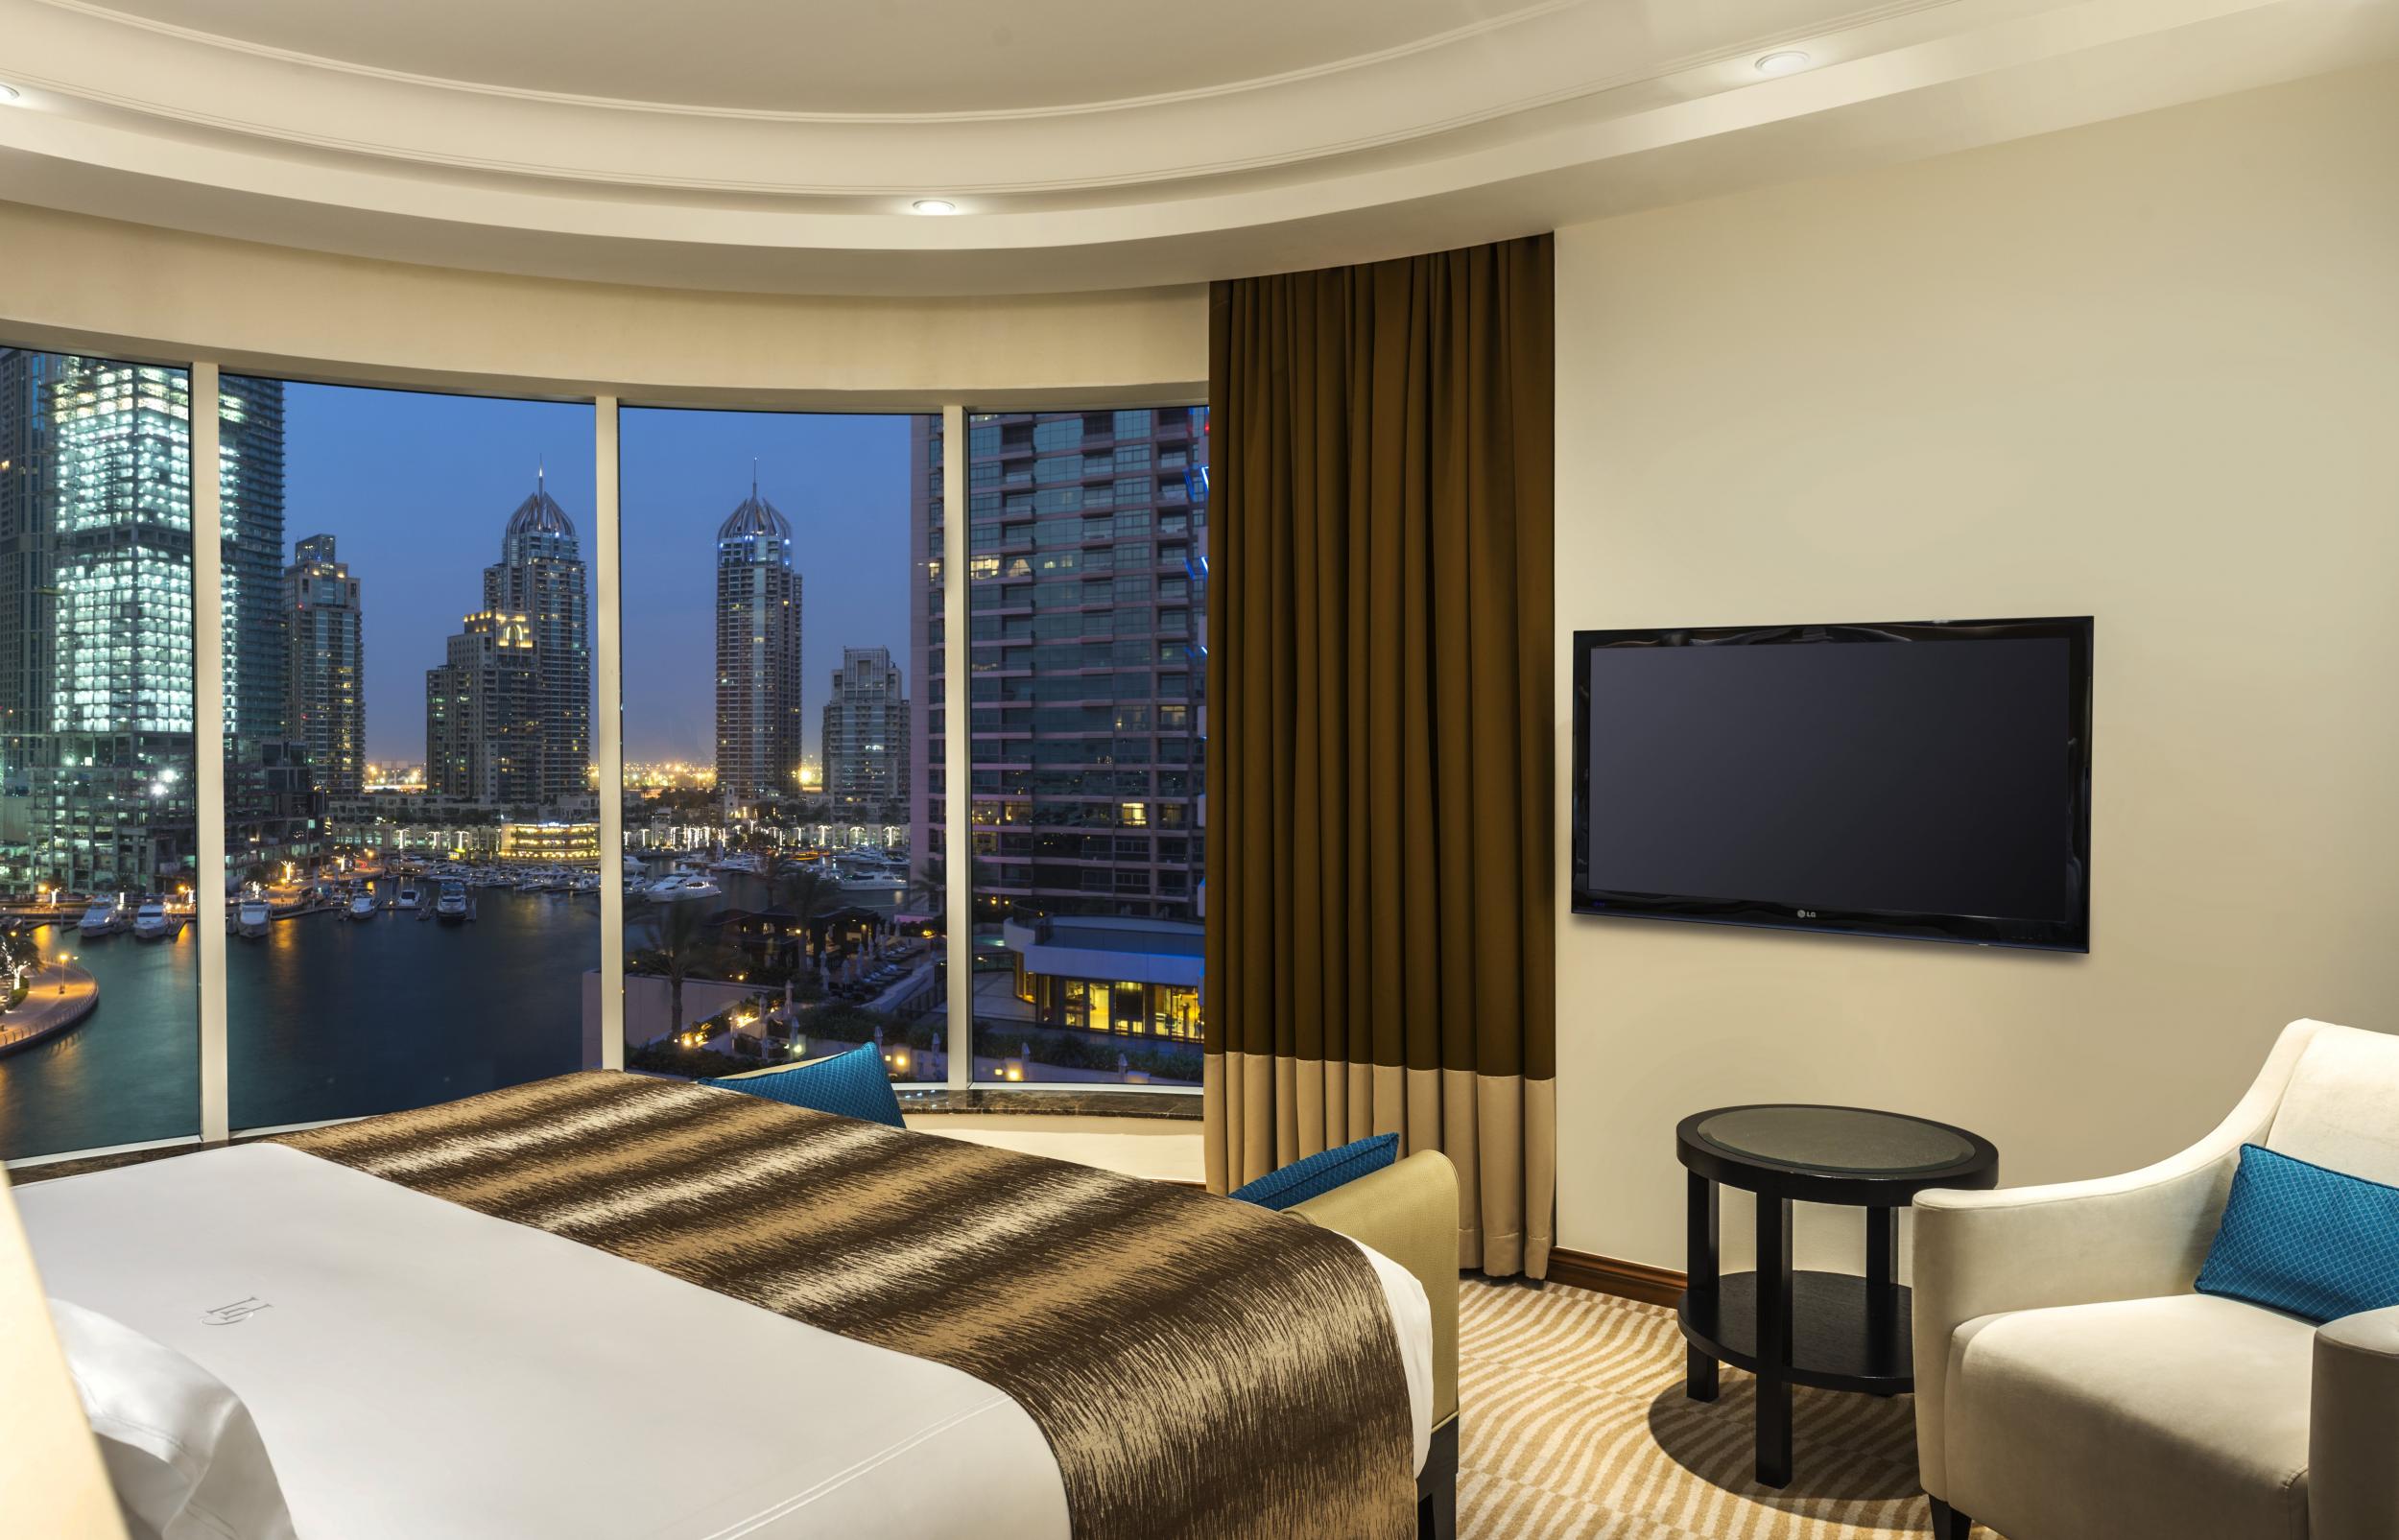 Admire the city lights from Grosvenor House